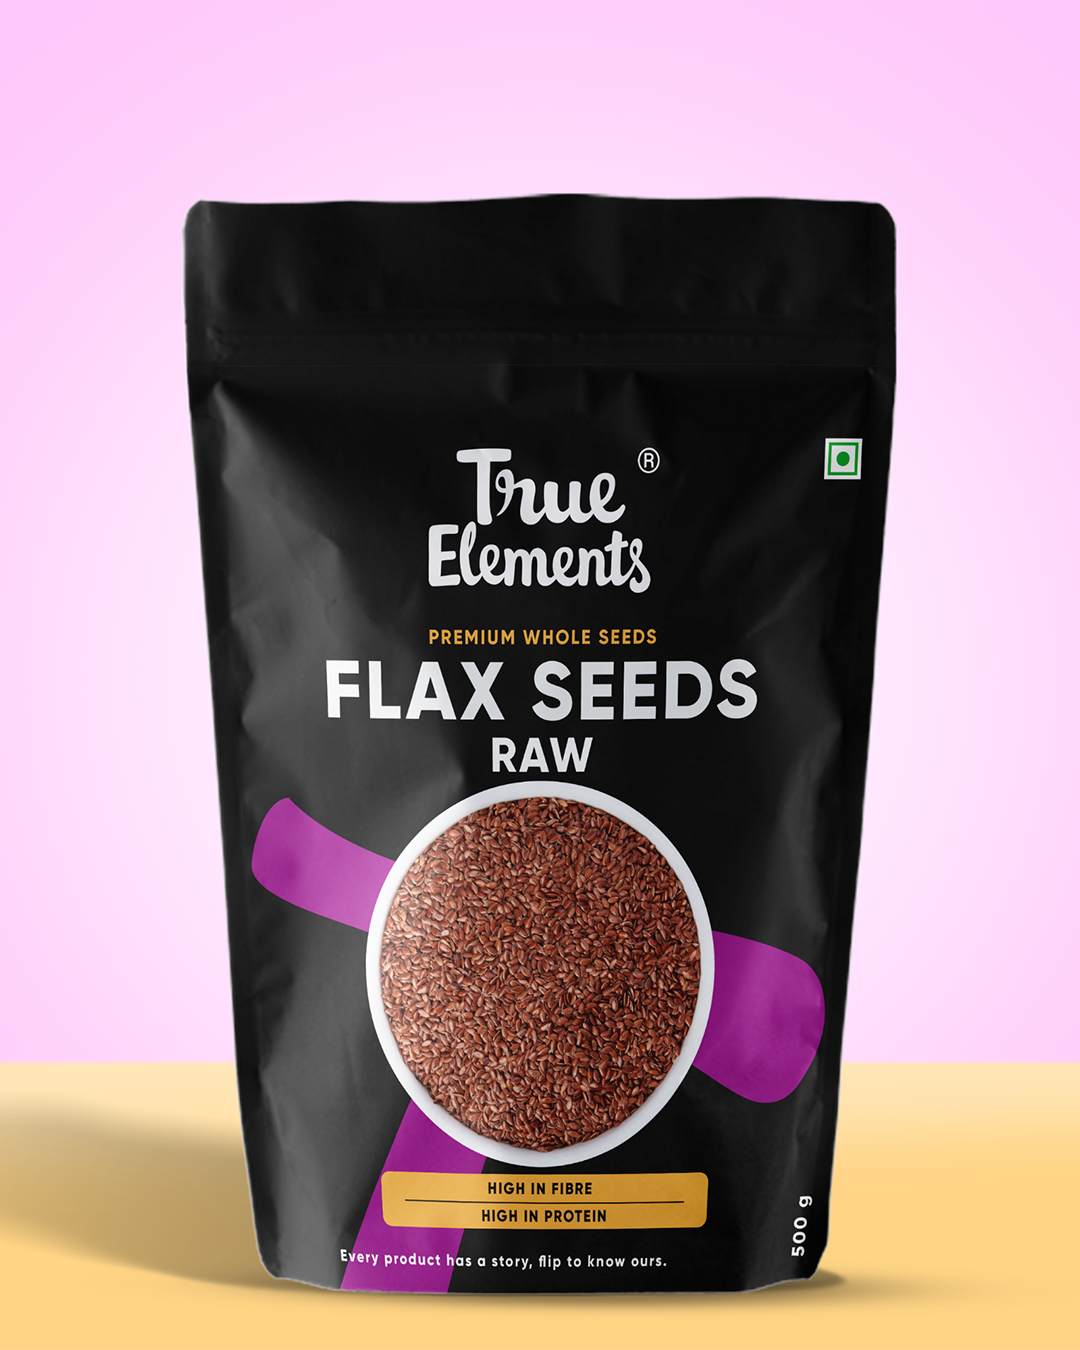 True elements raw flax seeds 500g Pouch (Premium Whole Seeds)